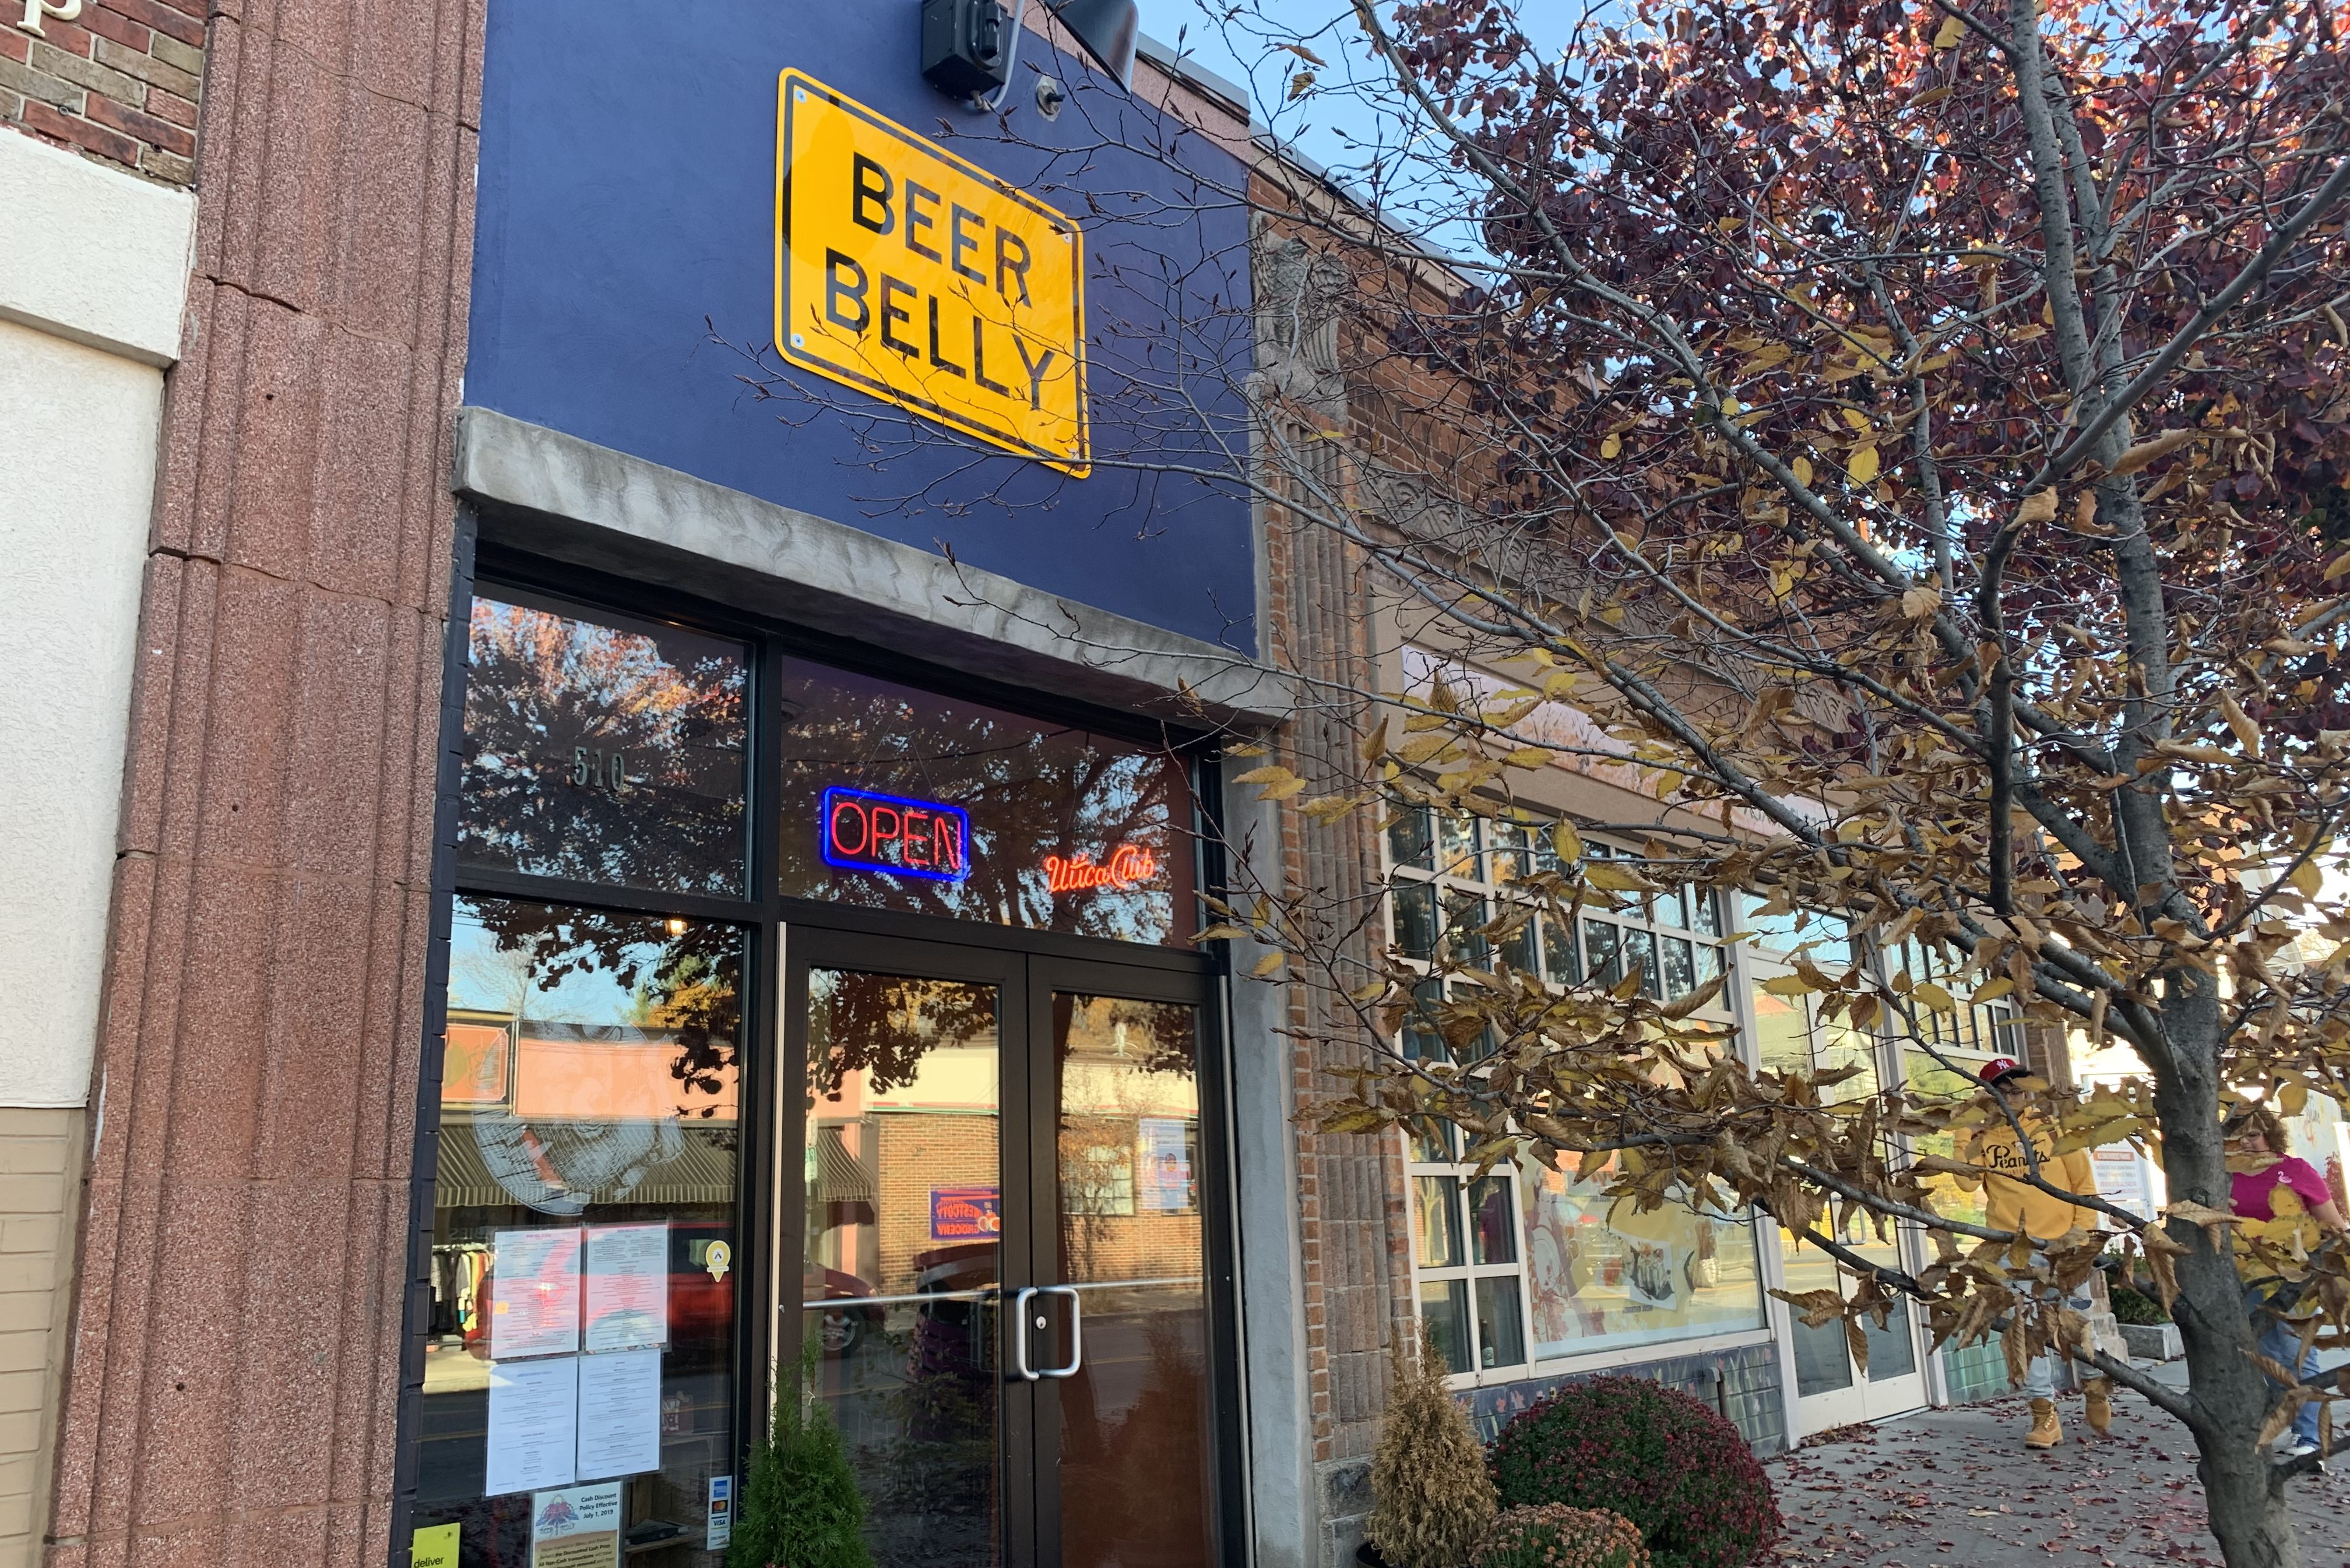 Beer Belly Deli and Bar on Westcott Street